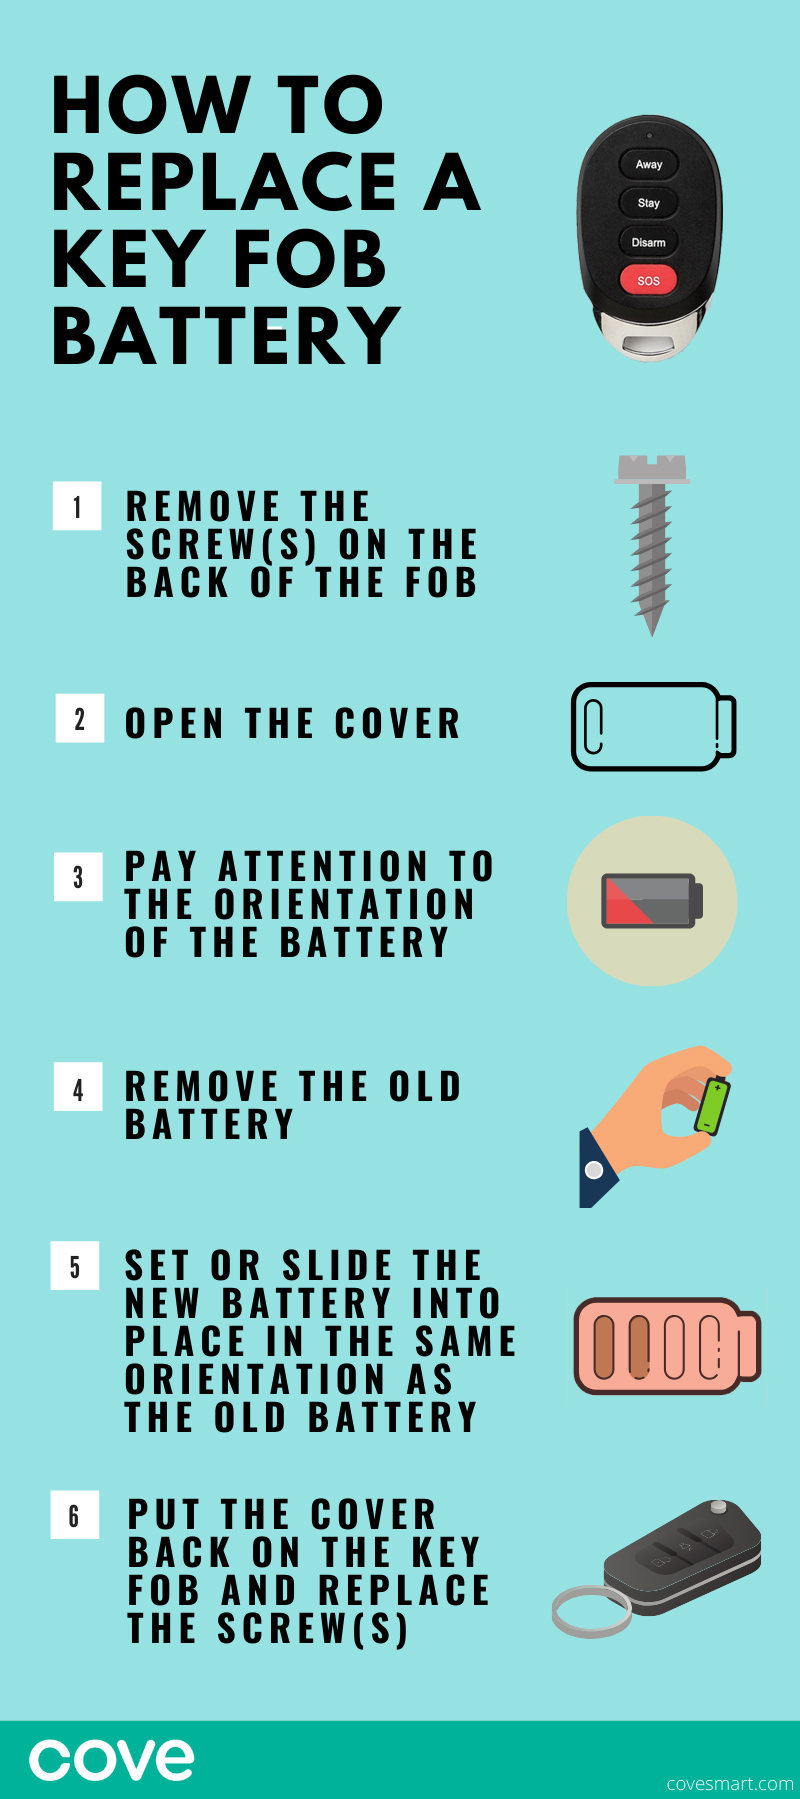 Remove the screws, open the cover, remember the orientation of the battery, remove the battery, replace the battery.